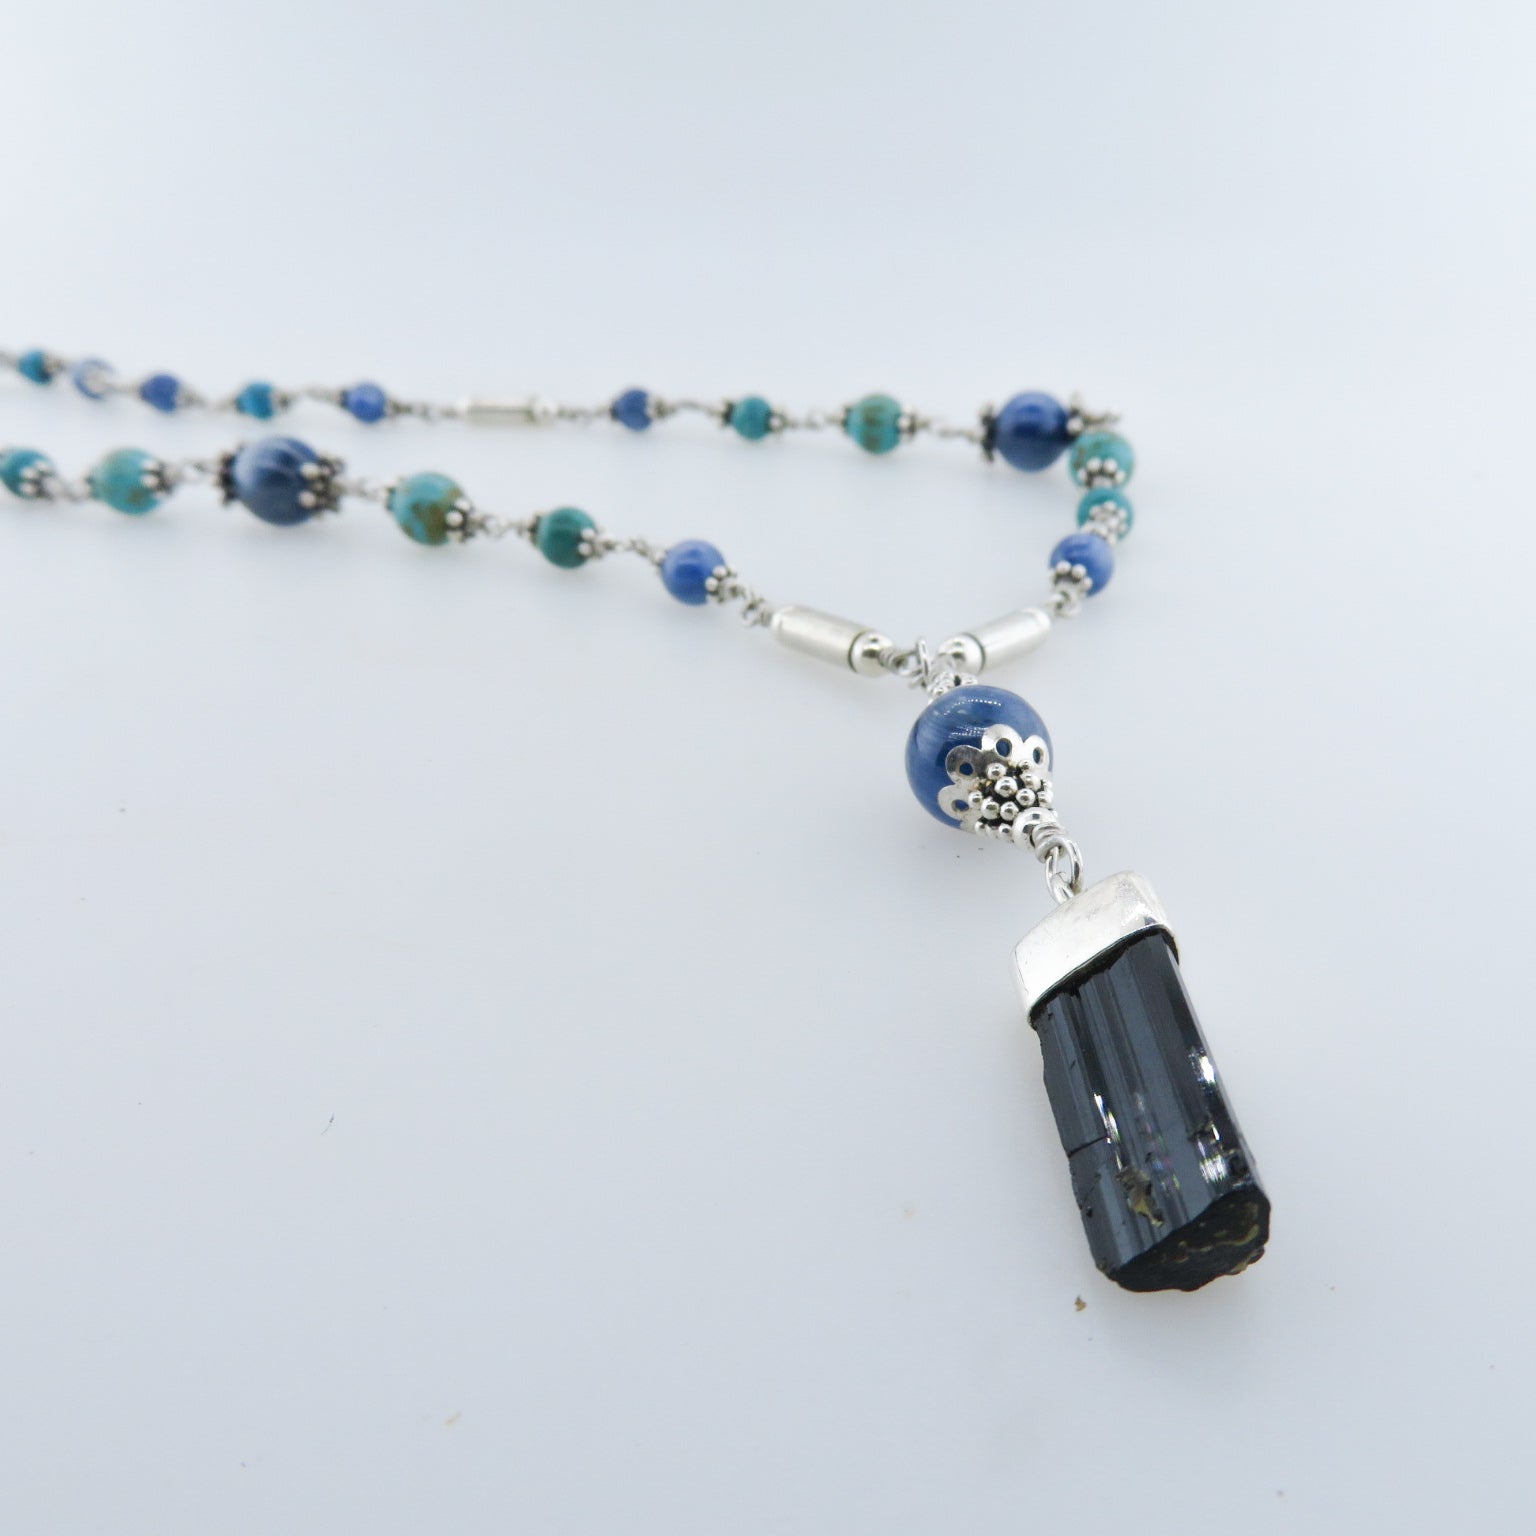 Black Tourmaline Necklace with Kyanite, Turquoise and Sterling Silver